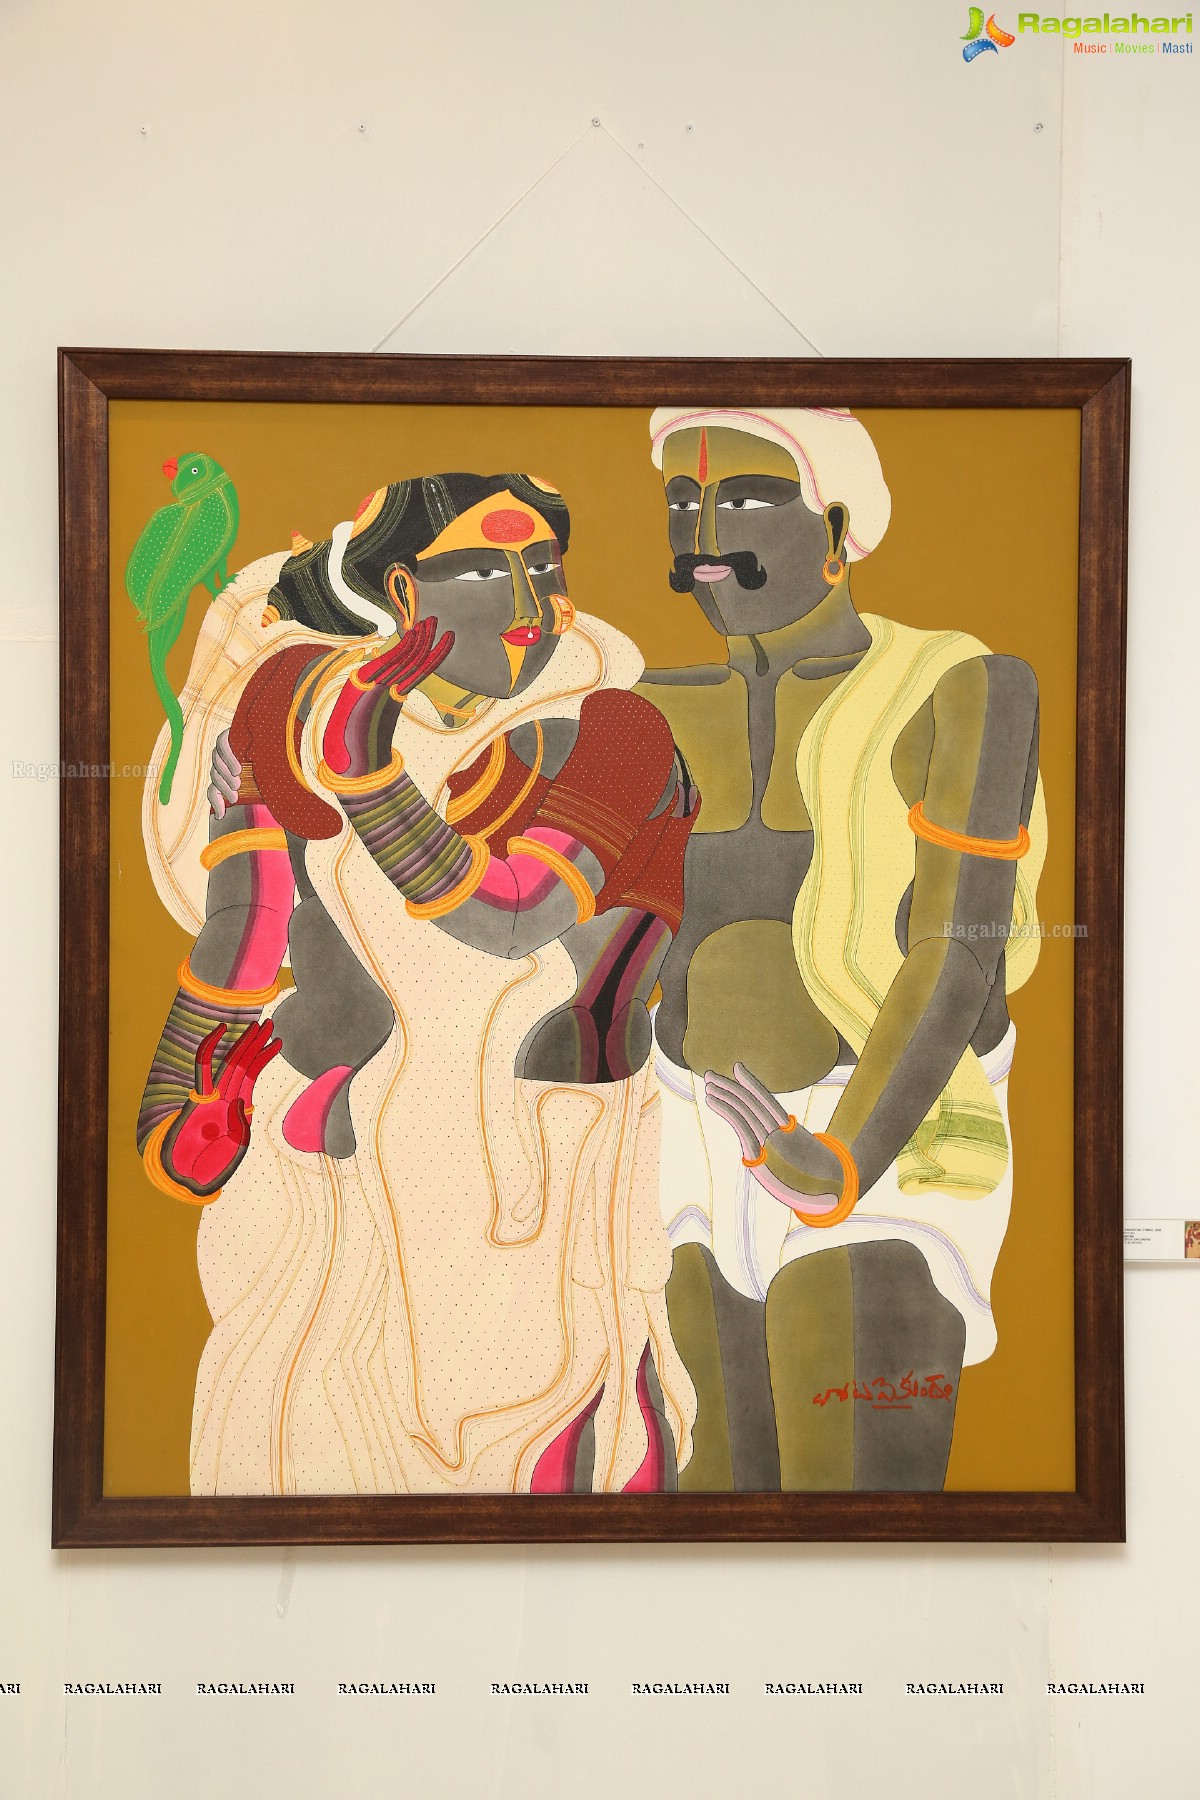 Exhibition of Works by Thota Vaikuntam at Chitramayee State Gallery of Art, Hyderabad